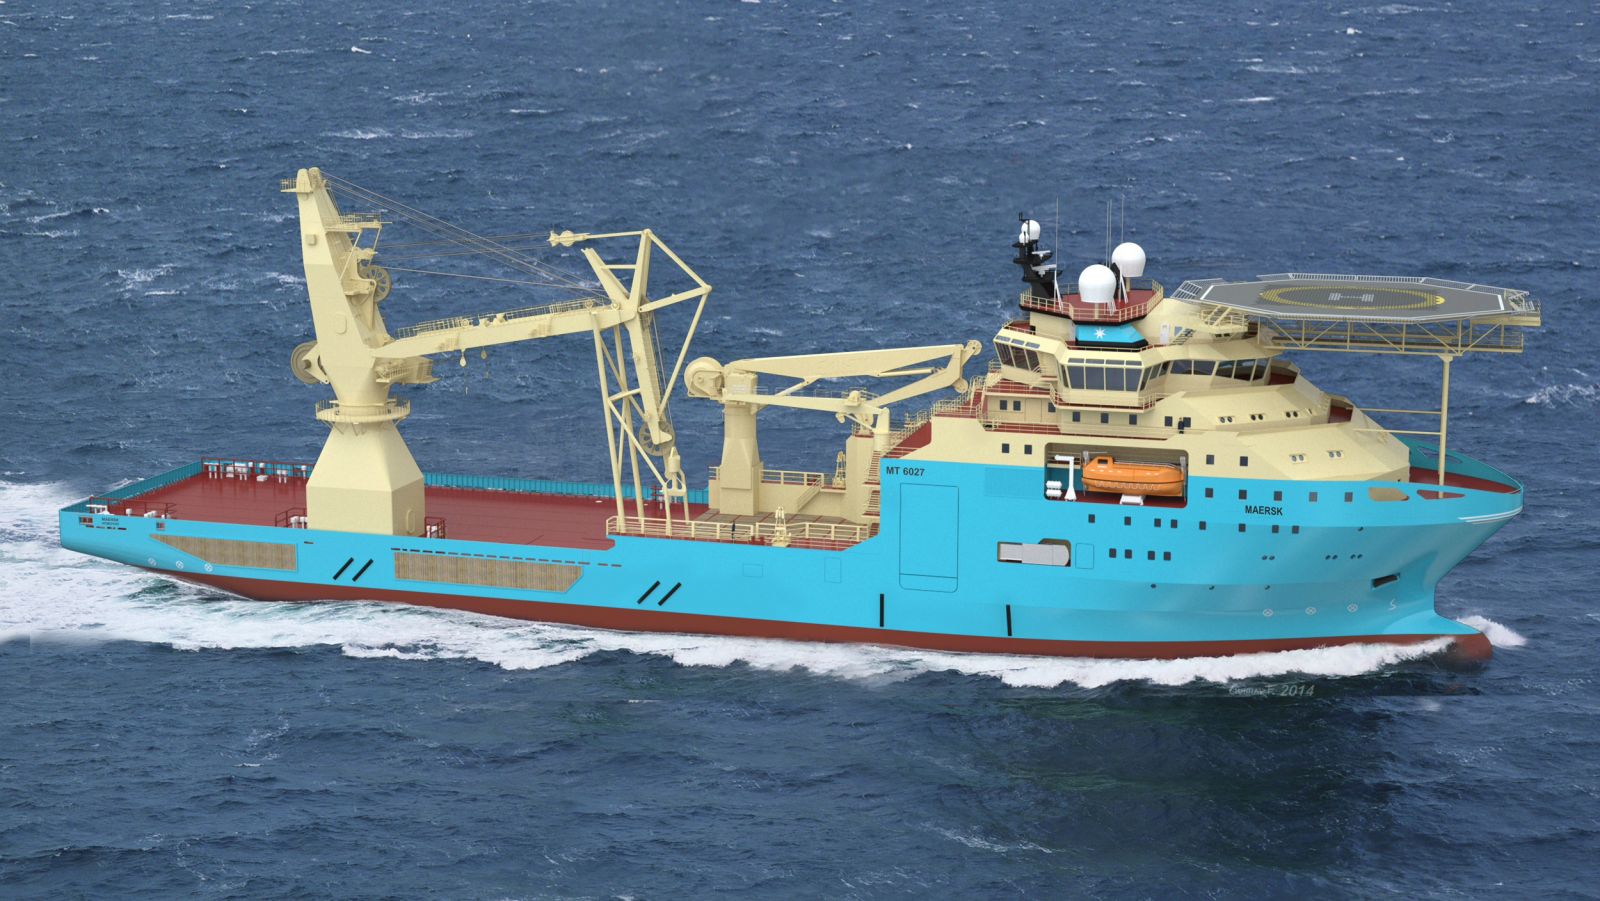 Maersk subsea support vessel